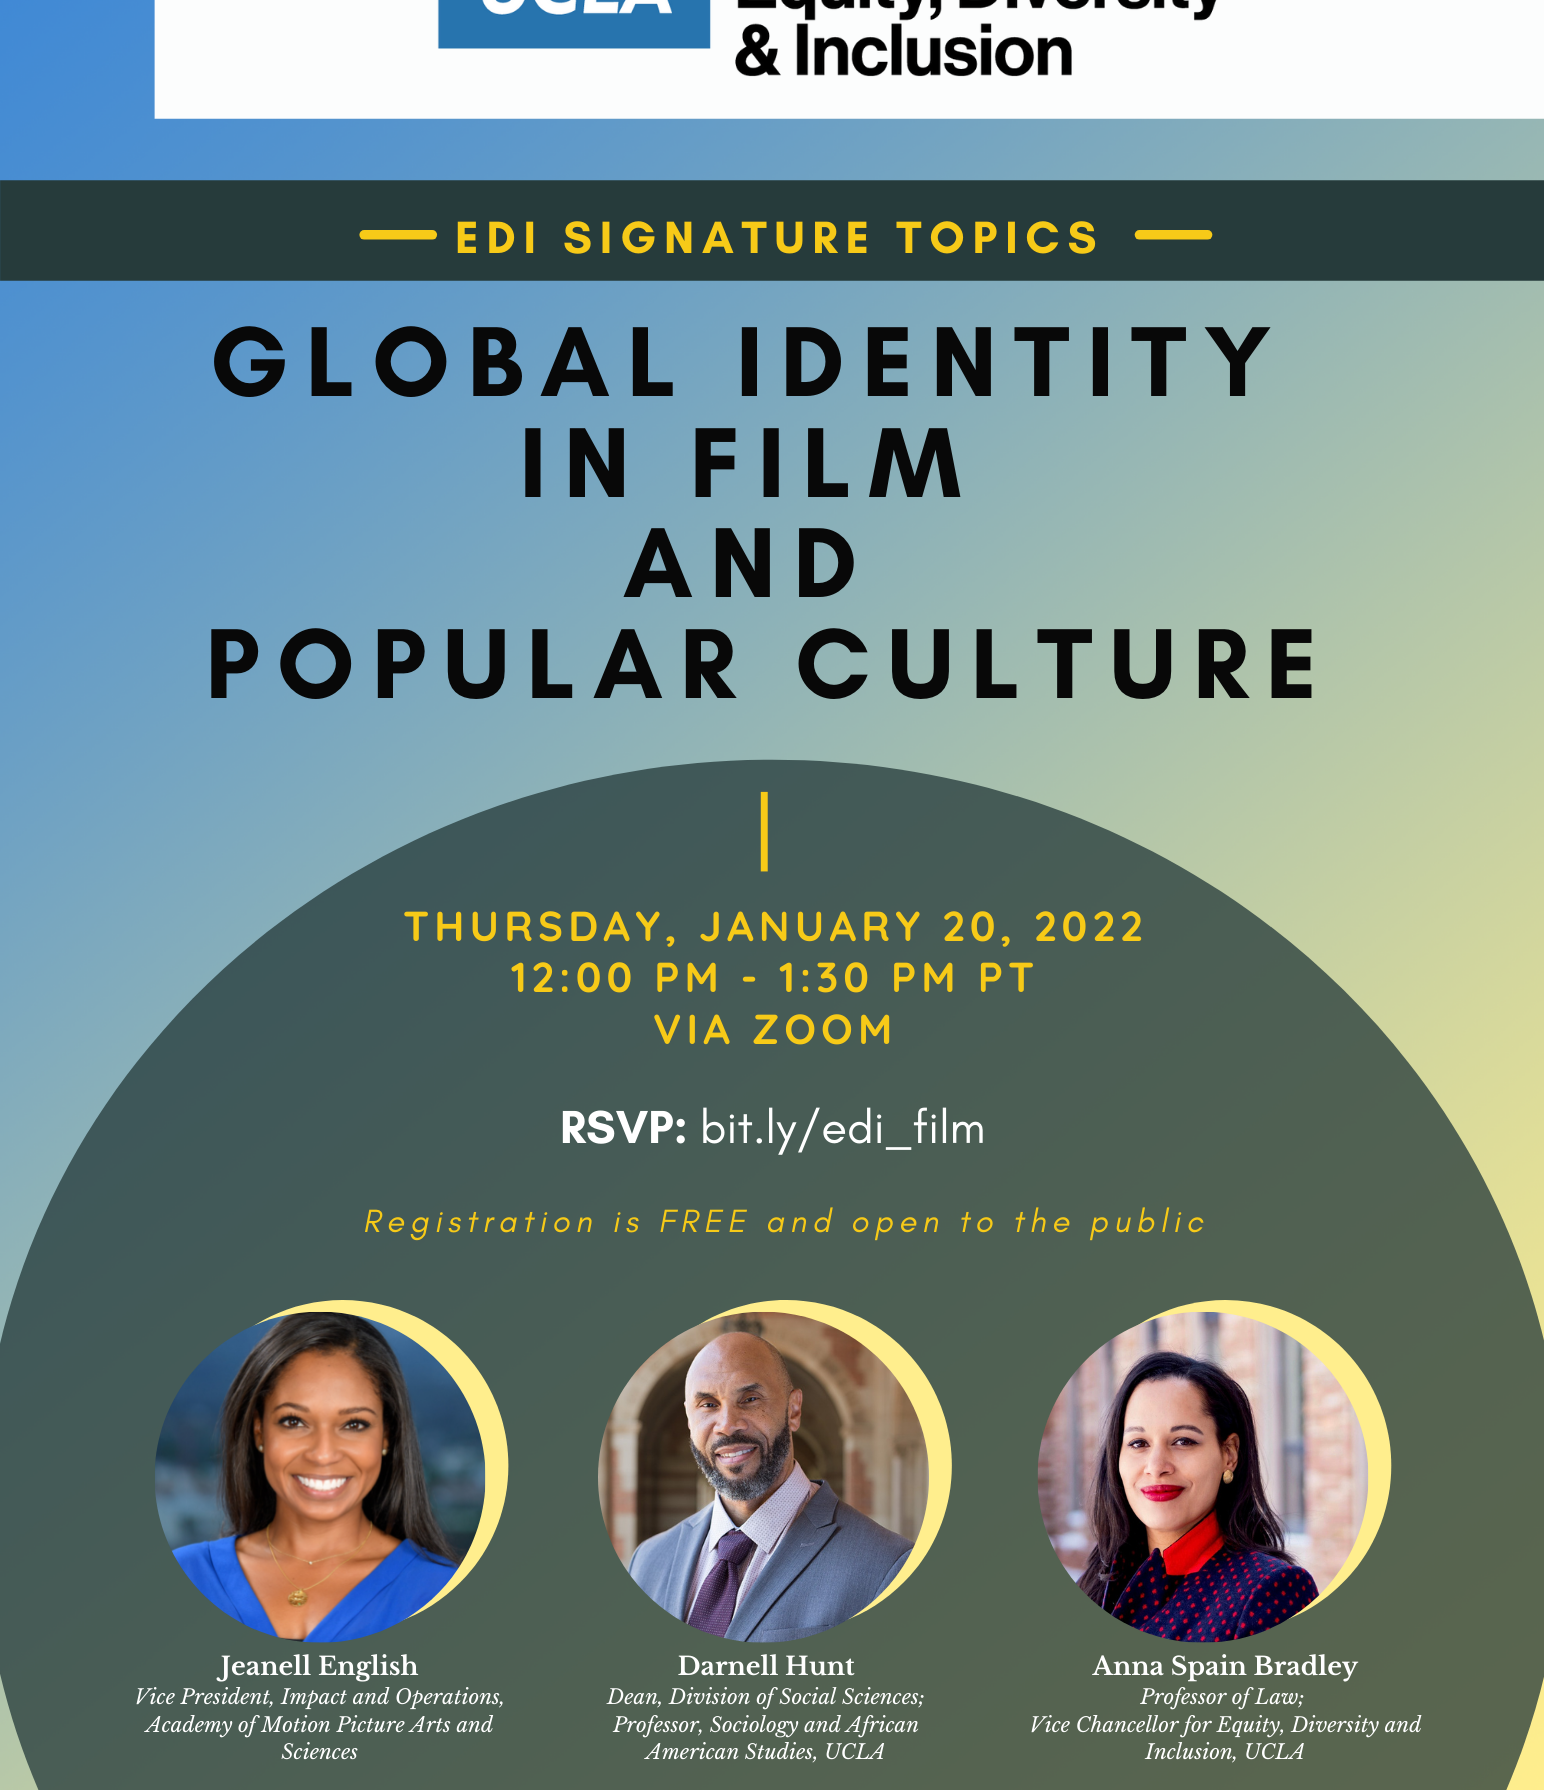 flyer for edi signature topics - Global Identity in Film and Popular Culture, taking place on thursday, january 20, 2022 at 12 pm